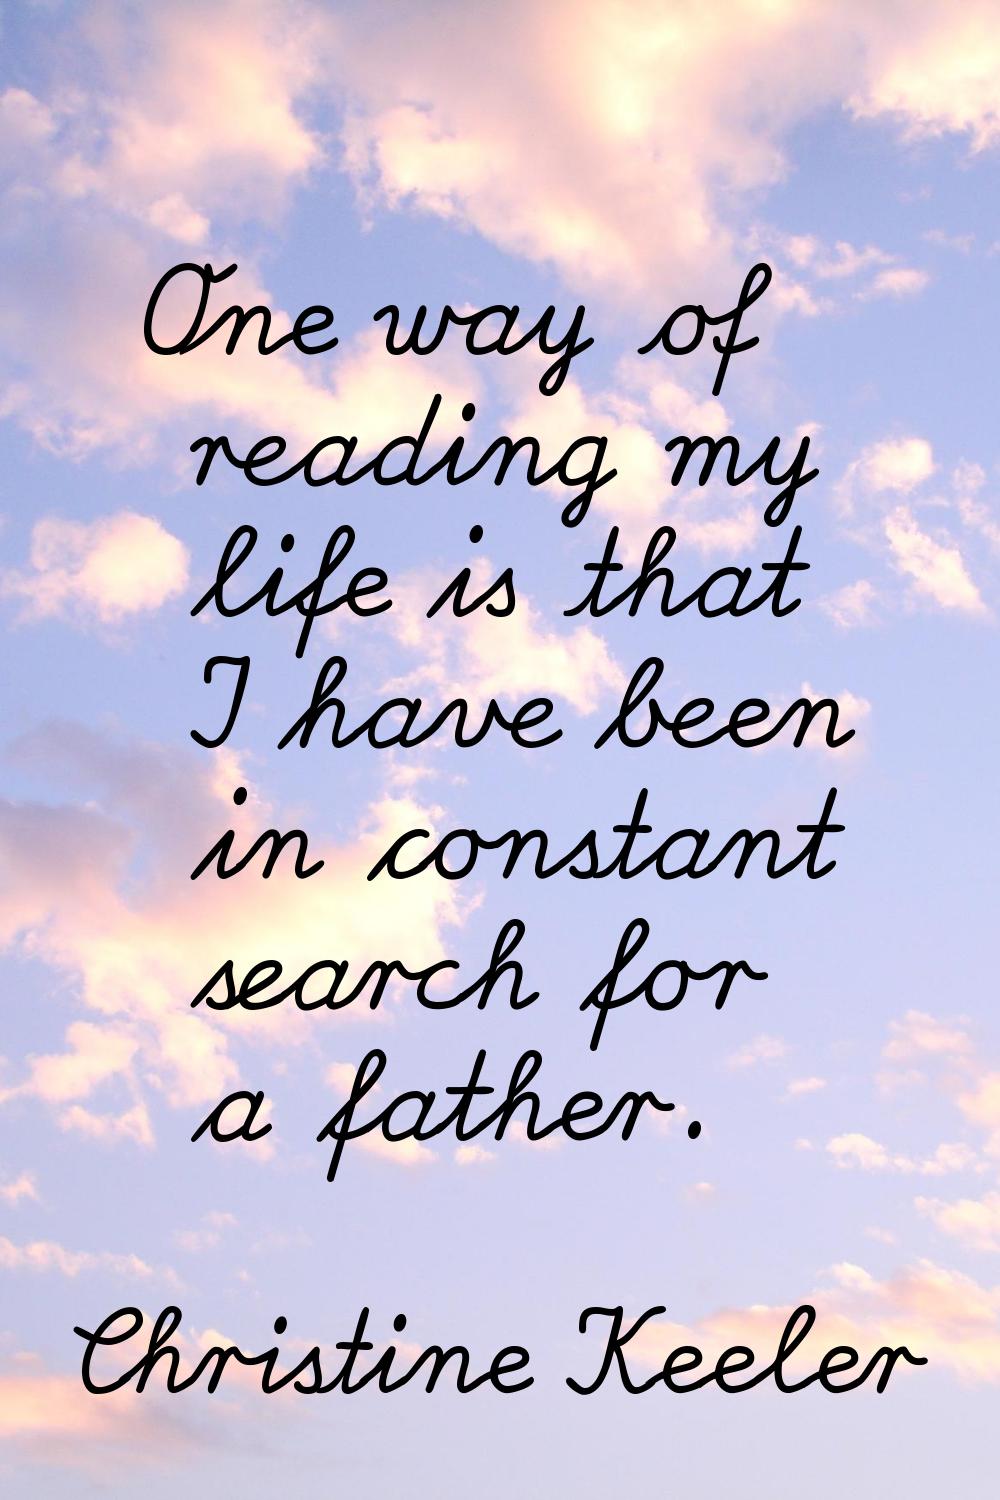 One way of reading my life is that I have been in constant search for a father.